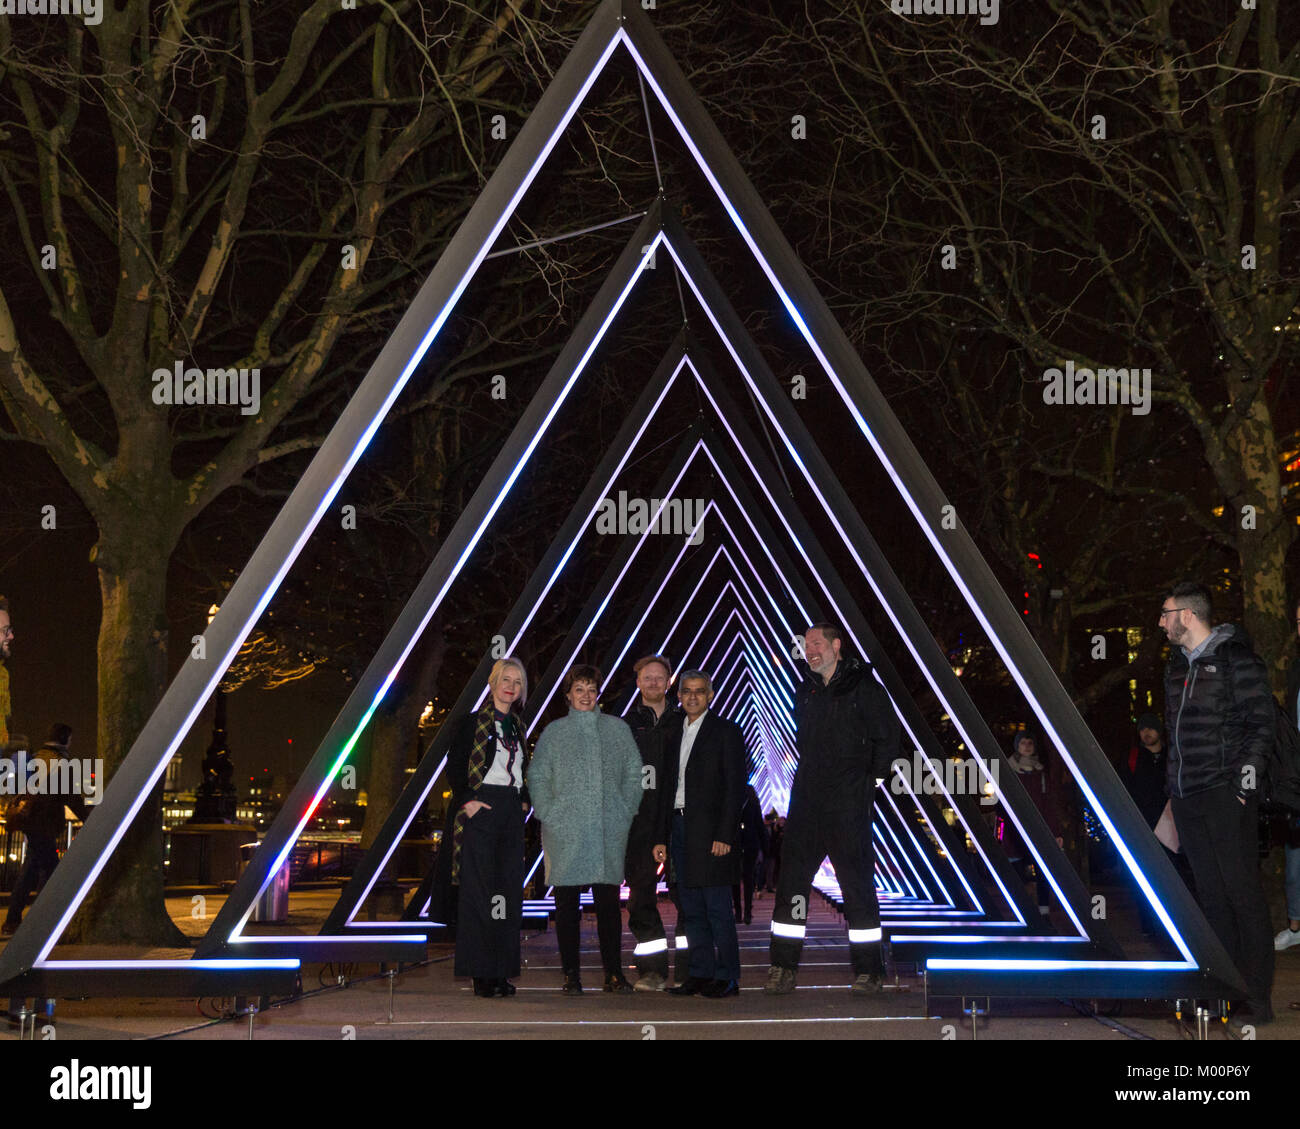 London, UK. 17th Jan 2018. Lumiere London 2018 Lights festival. The Mayor of London, UK. Sadiq Khan, with Director of Artichoke CEO and Lumiere London Artistic Director Helen Marriage, Deputy Mayor of Culture and Creative Industries Justine Simons, and artist Kasper Rasmussen, alongside artwork The Wave by Vertigo. Lumiere London is a light festival that presents an array of public art work and light installations across the capital. Credit: Imageplotter News and Sports/Alamy Live News Stock Photo